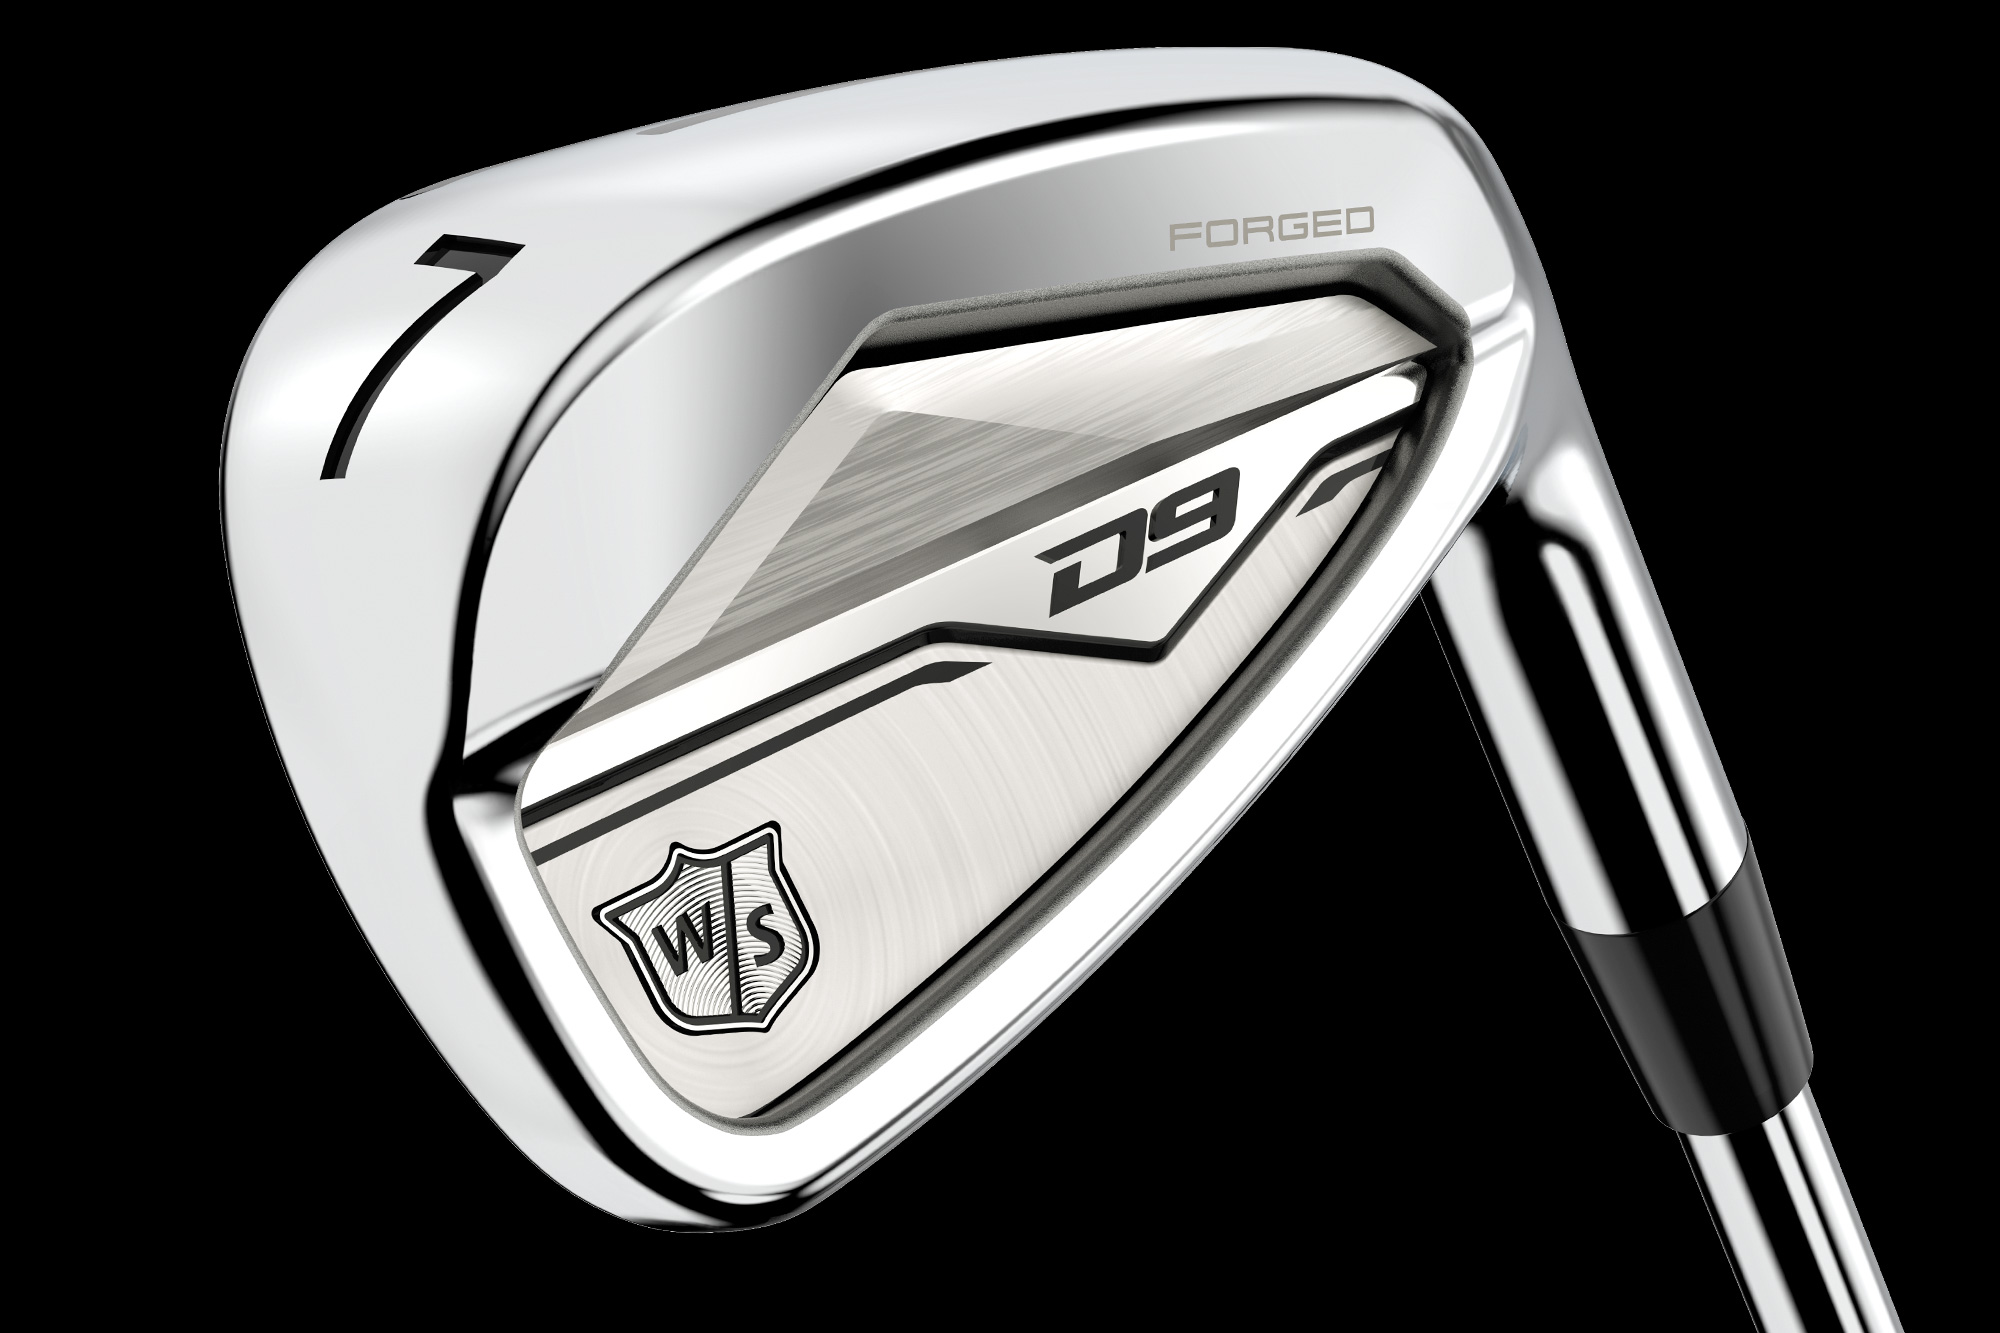 Wilson D9 forged irons